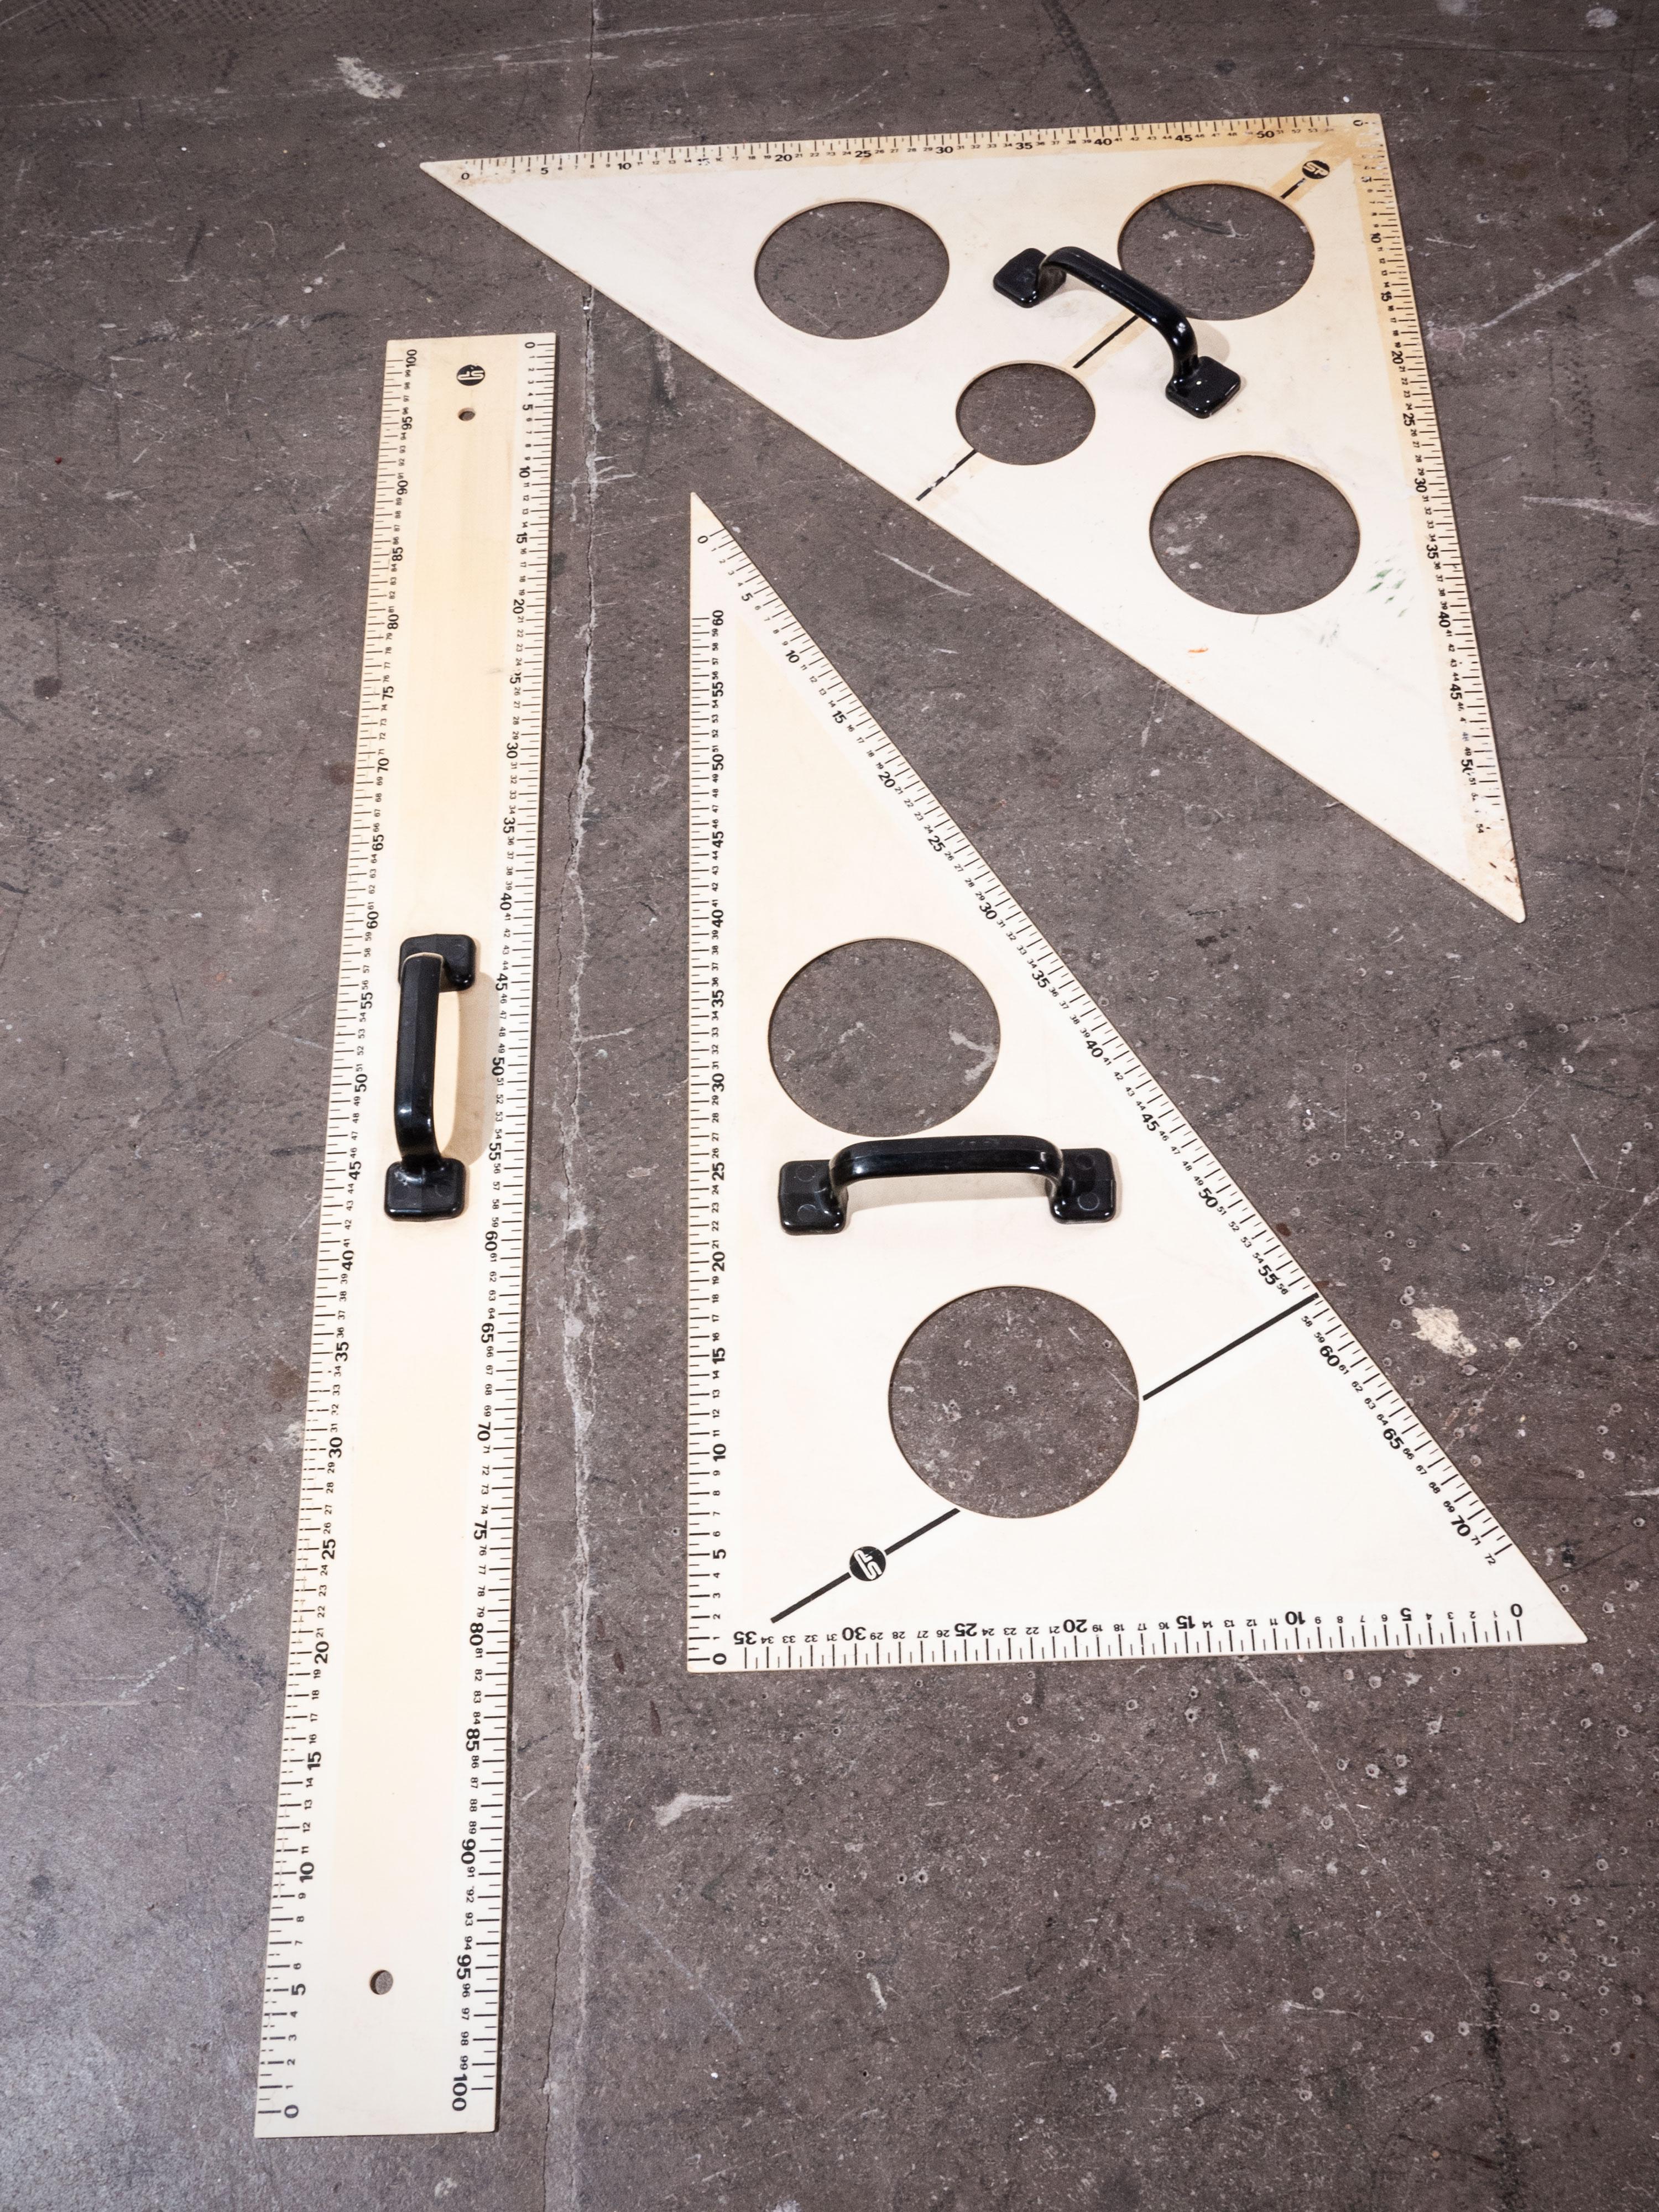 1950s extra large blackboard measures set, three pieces
1950s extra large blackboard measures set. Made from a dense opaque acrylic with chunky black handles. Ruler is 103 cm in total length.

Workshop report
Our workshop team inspect every